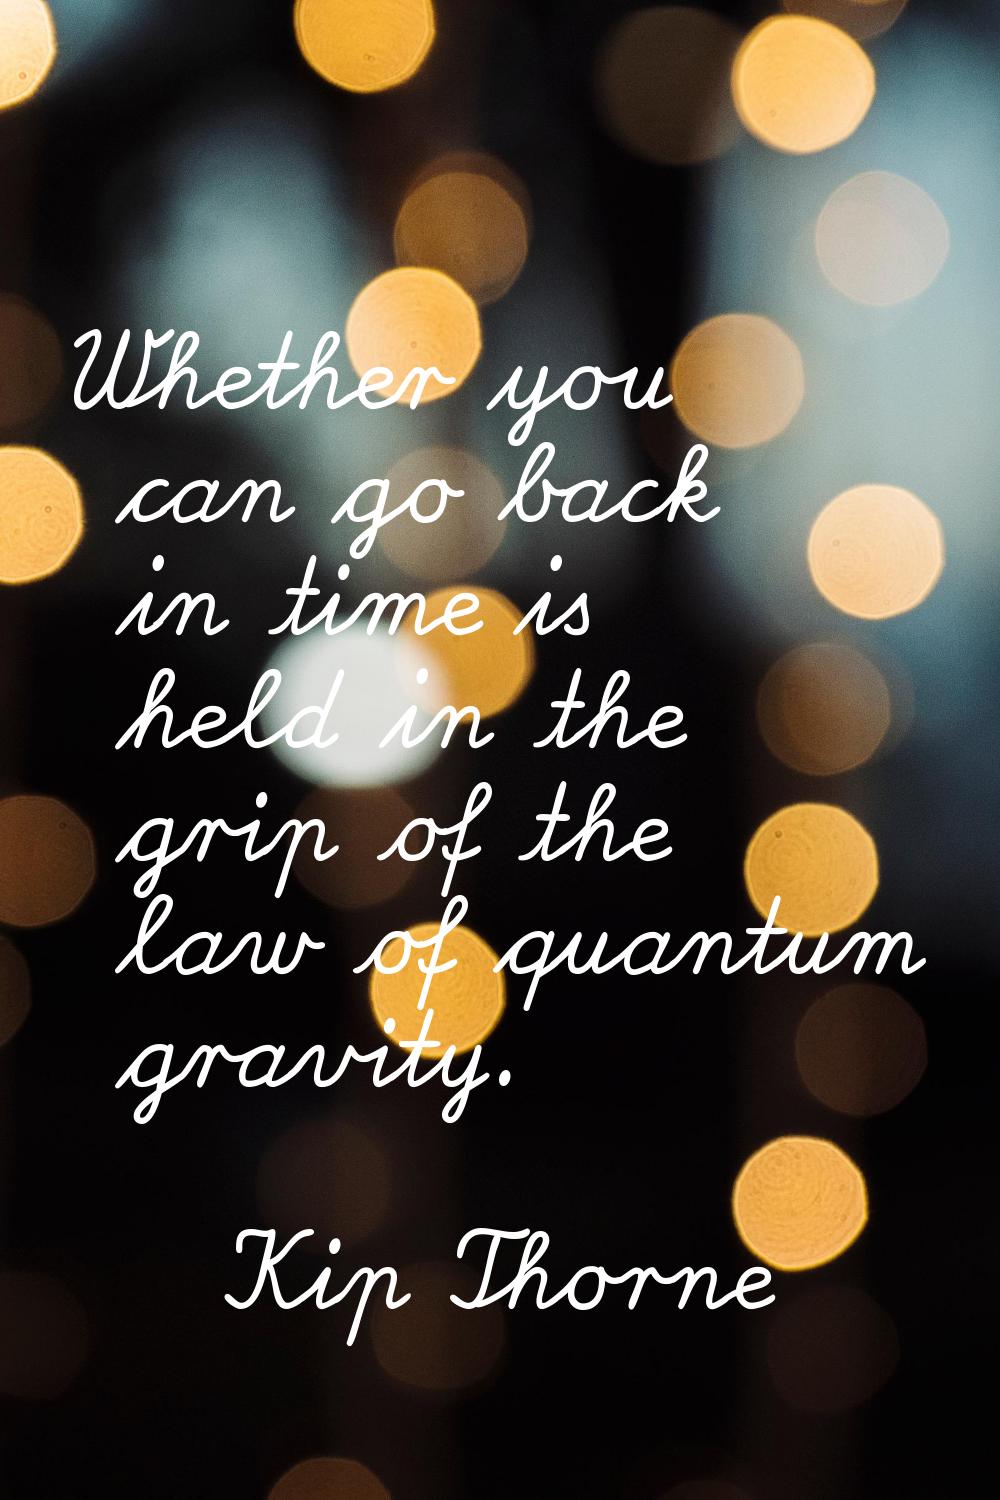 Whether you can go back in time is held in the grip of the law of quantum gravity.